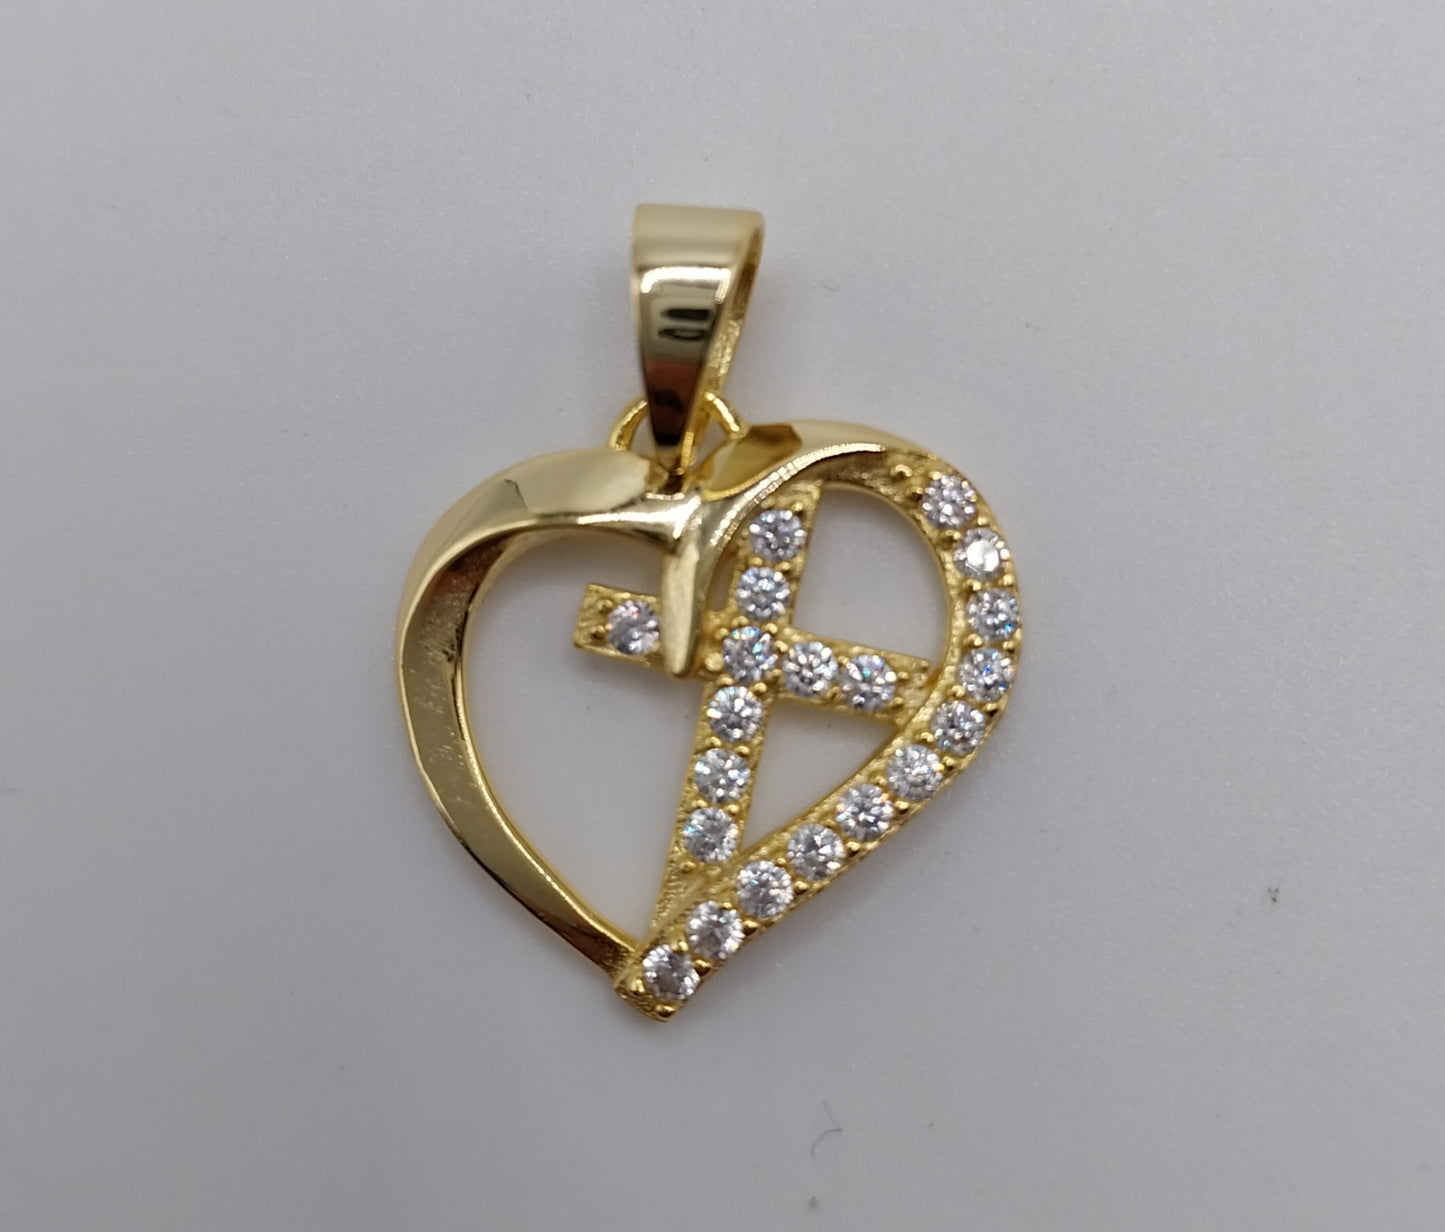 Heart and Cross Pendant Silver 925 with Round and Square Cubic Zirconia